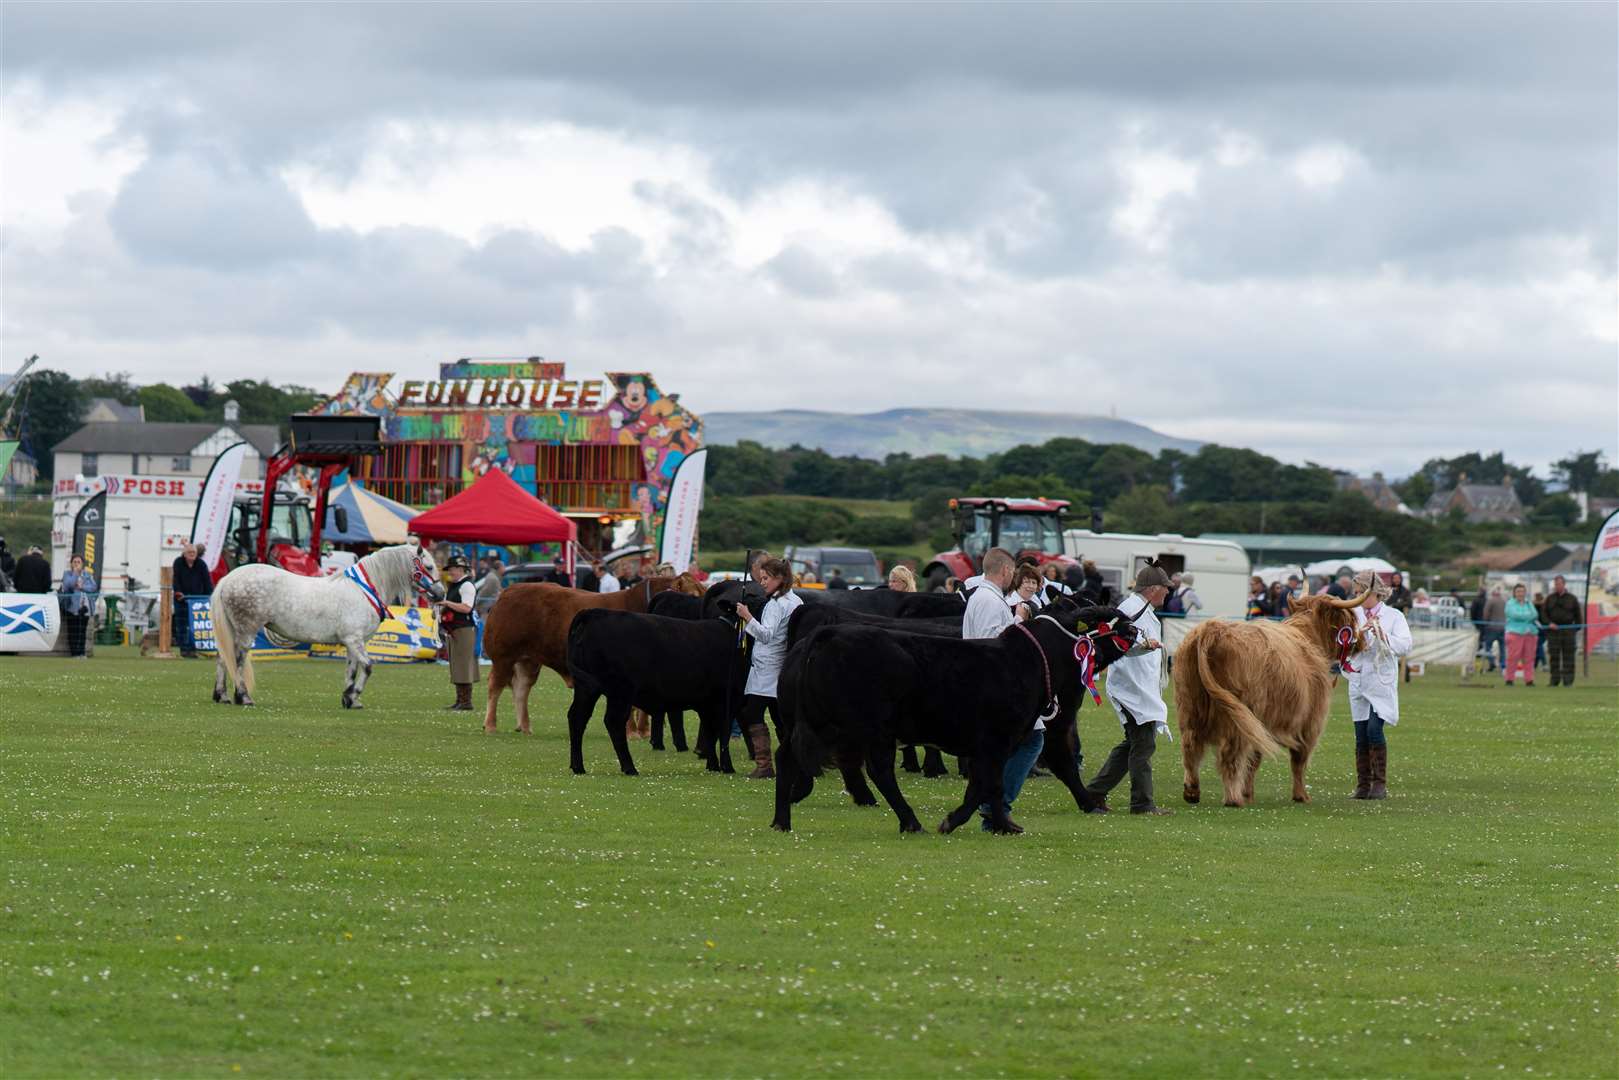 Sutherland Agricultural Show has been held annually for nearly 70 years but had to be called off in 2020 and will not be held again this year.